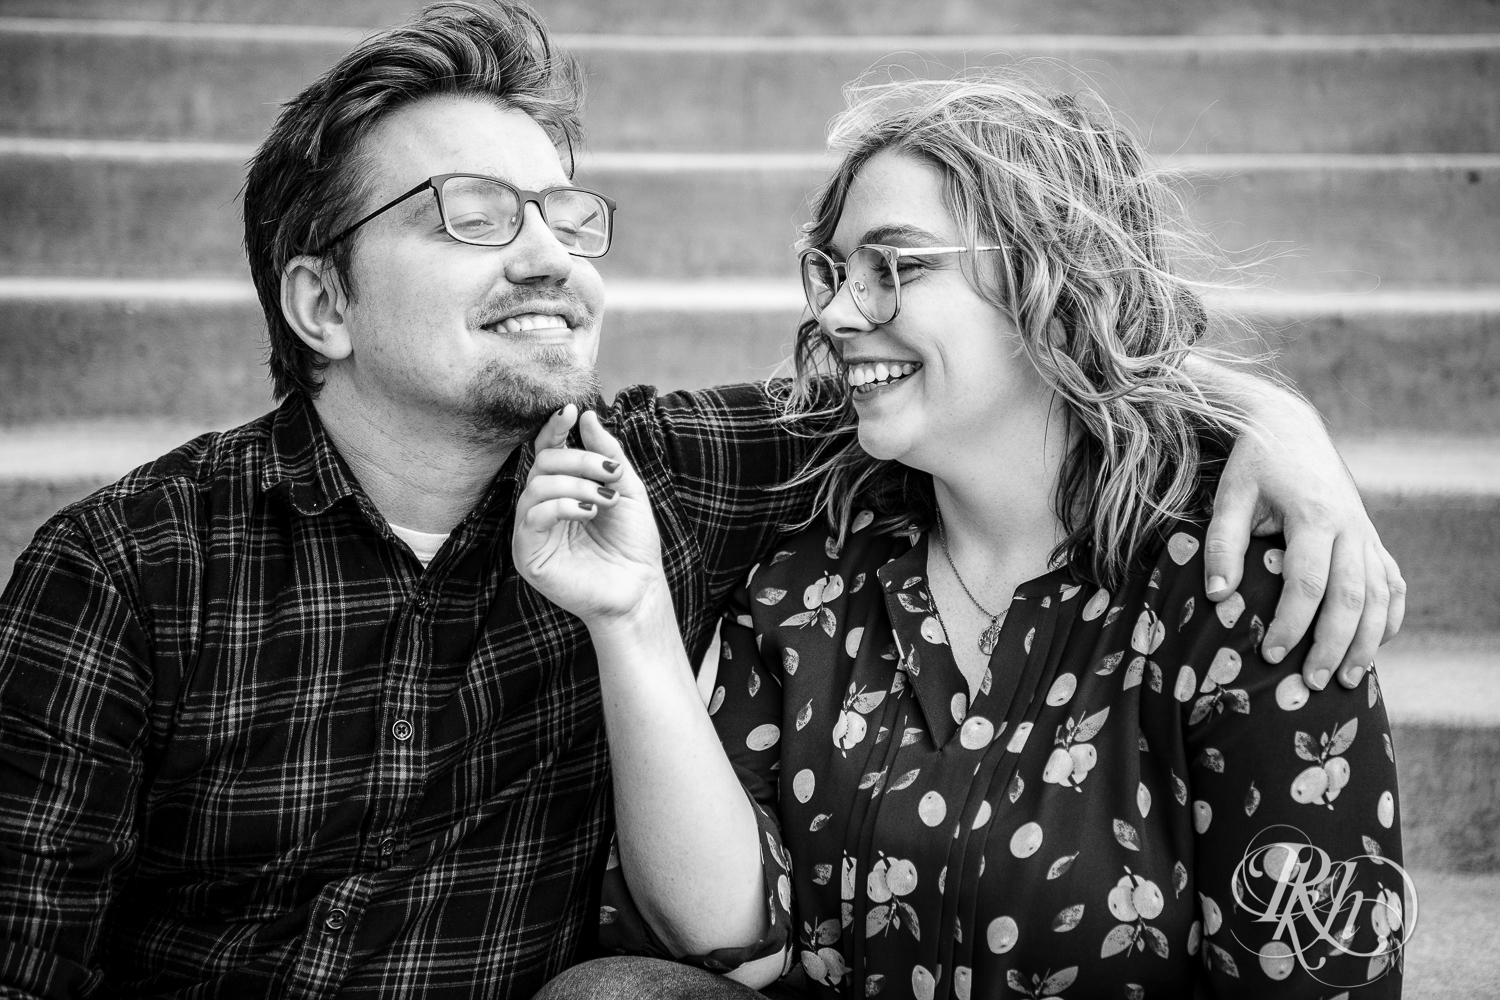 Blond woman with glasses and man with glasses smile on steps in Saint Paul, Minnesota.